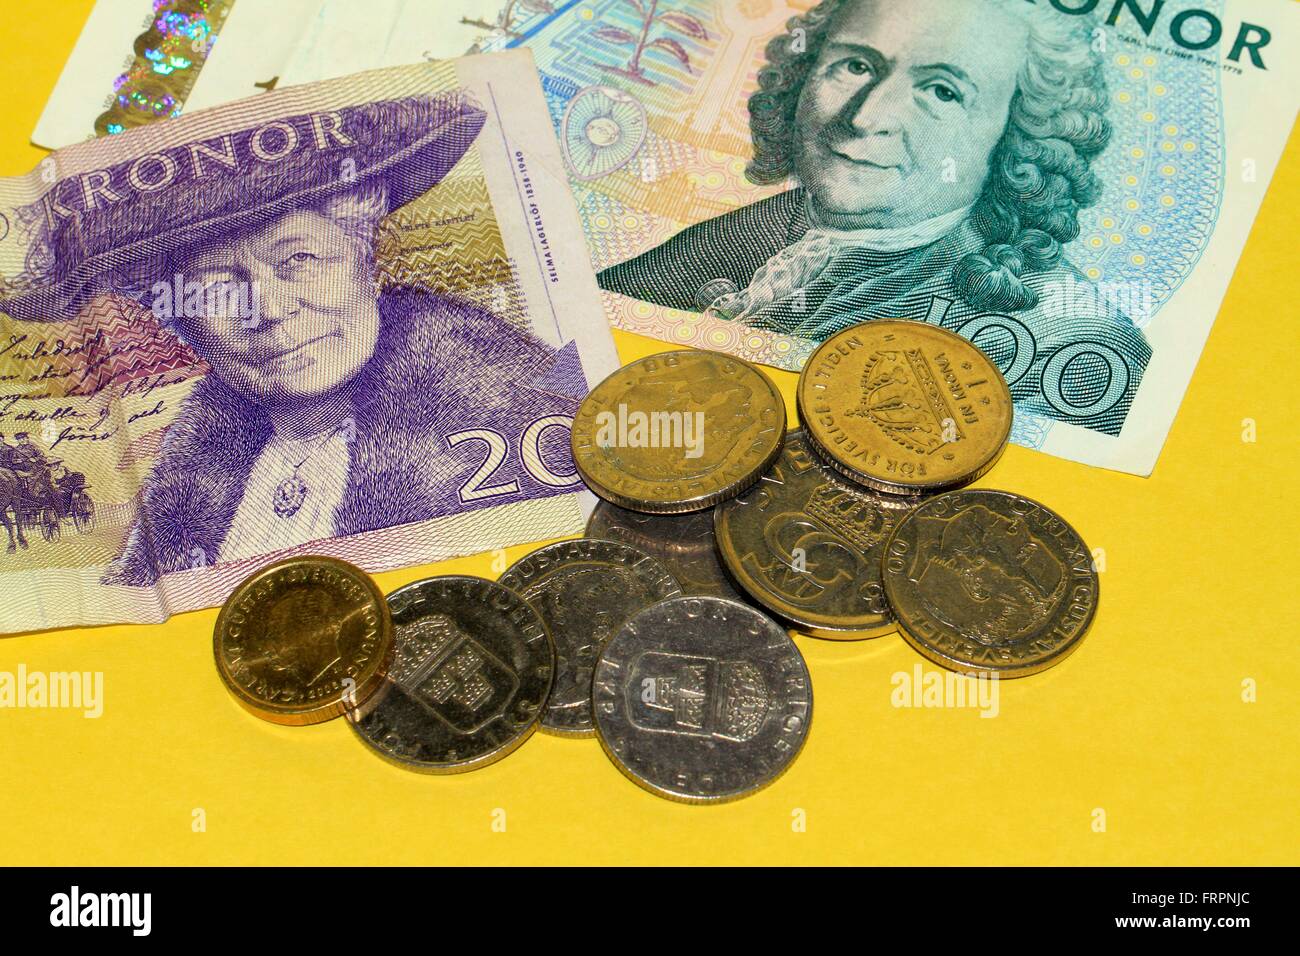 The crown (Swedish krona, plural krona) is the currency of Sweden. They can be freely exchanged. The coins and banknotes issued by the Bank of Sweden (Sveriges Riksbank). Sverige, Sweden, Kingdom of Sweden, Europe Date: March 19, 2016 Stock Photo